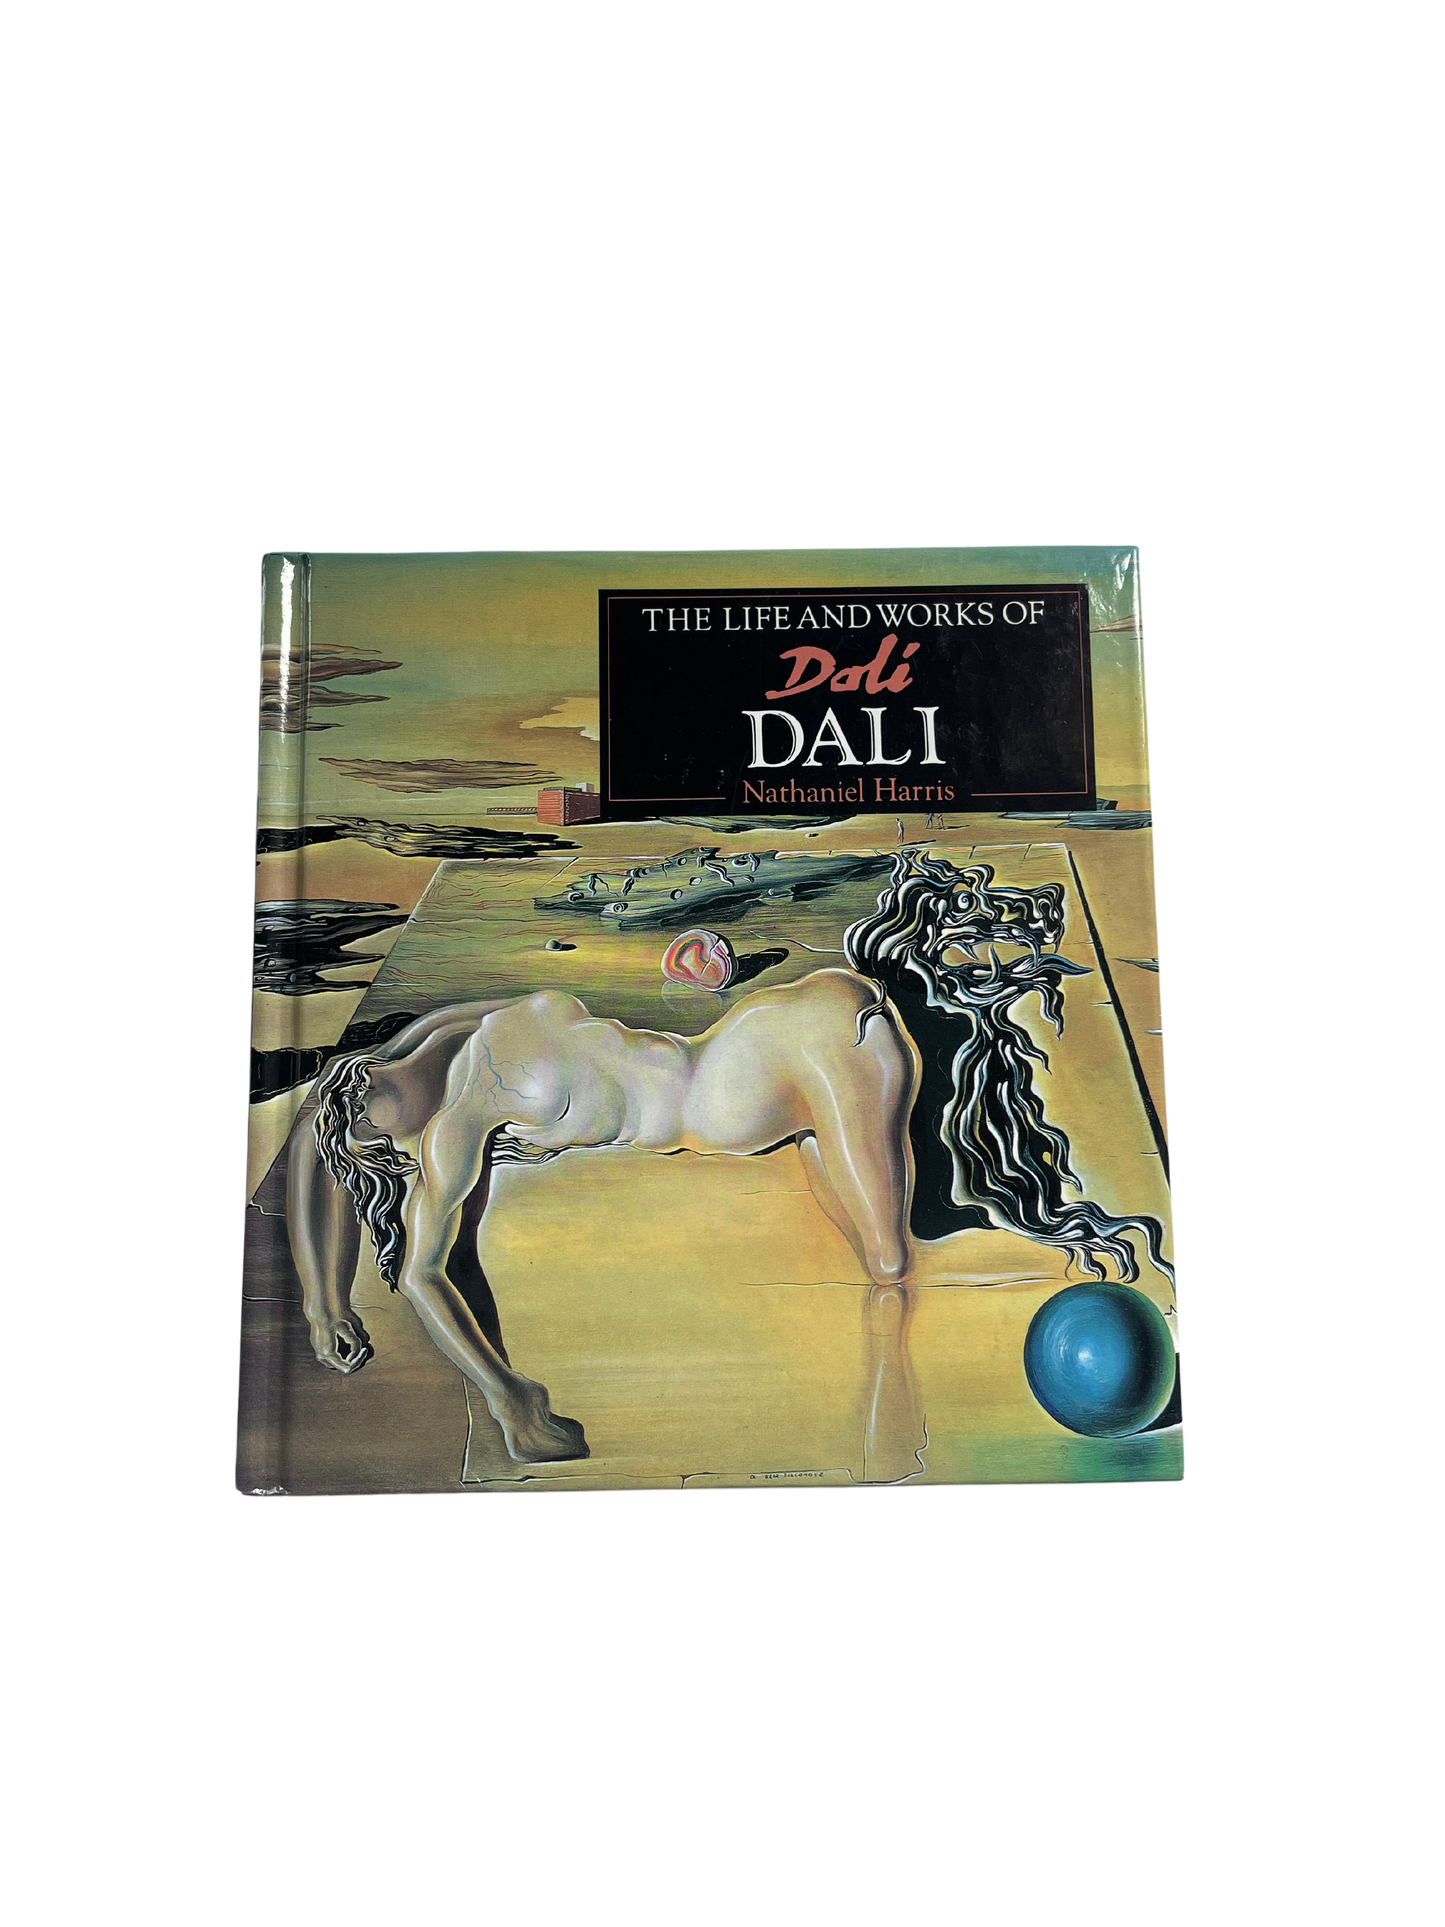 The Life and Works of Dali by Nathaniel Harris 8 1/2" x 8"